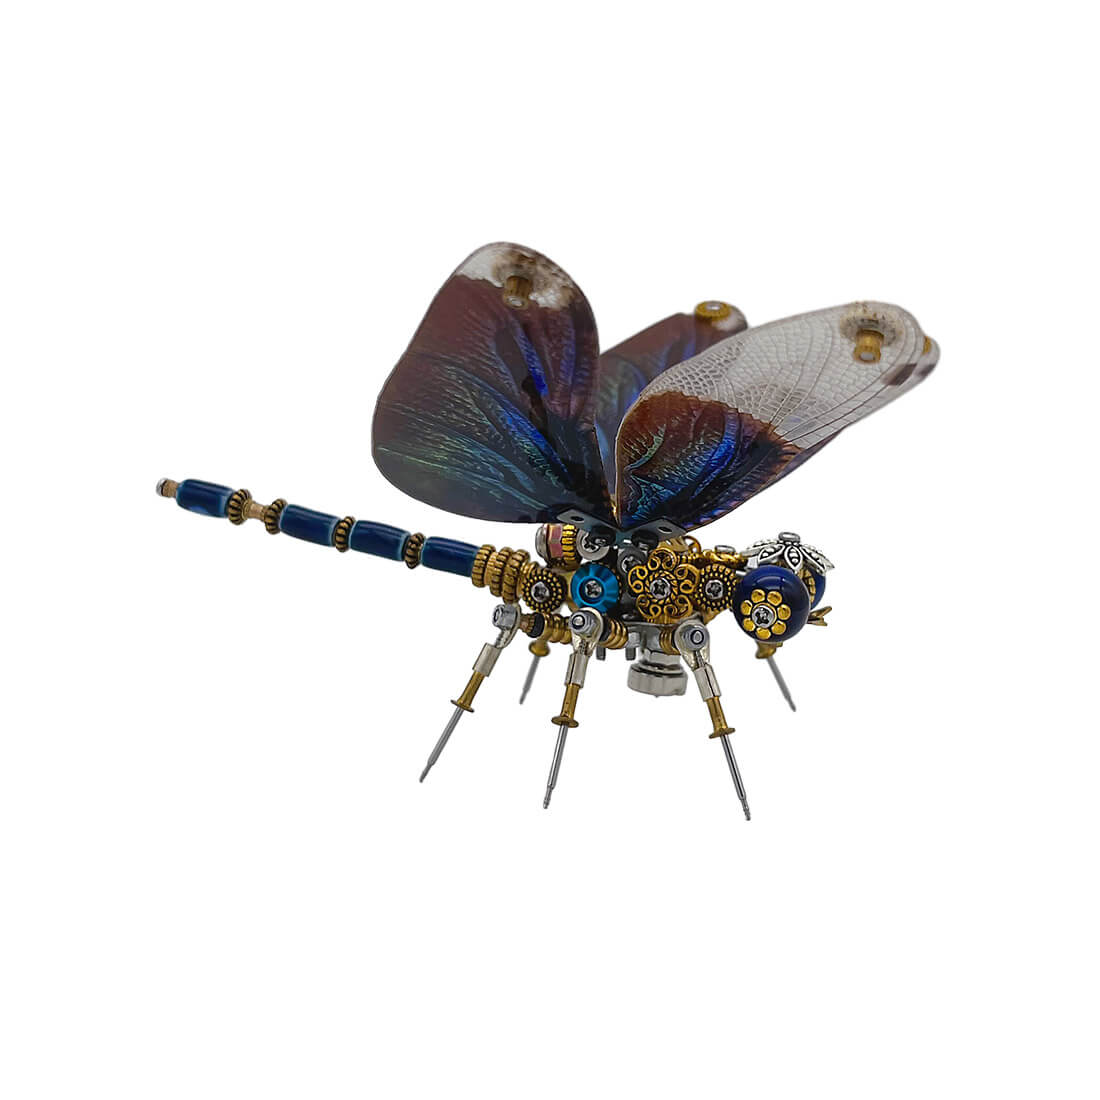 Mechanical Punk Metallic Dragonfly 3D DIY Insects Model Metal Assembly Toy Creative Ornament (200PCS)